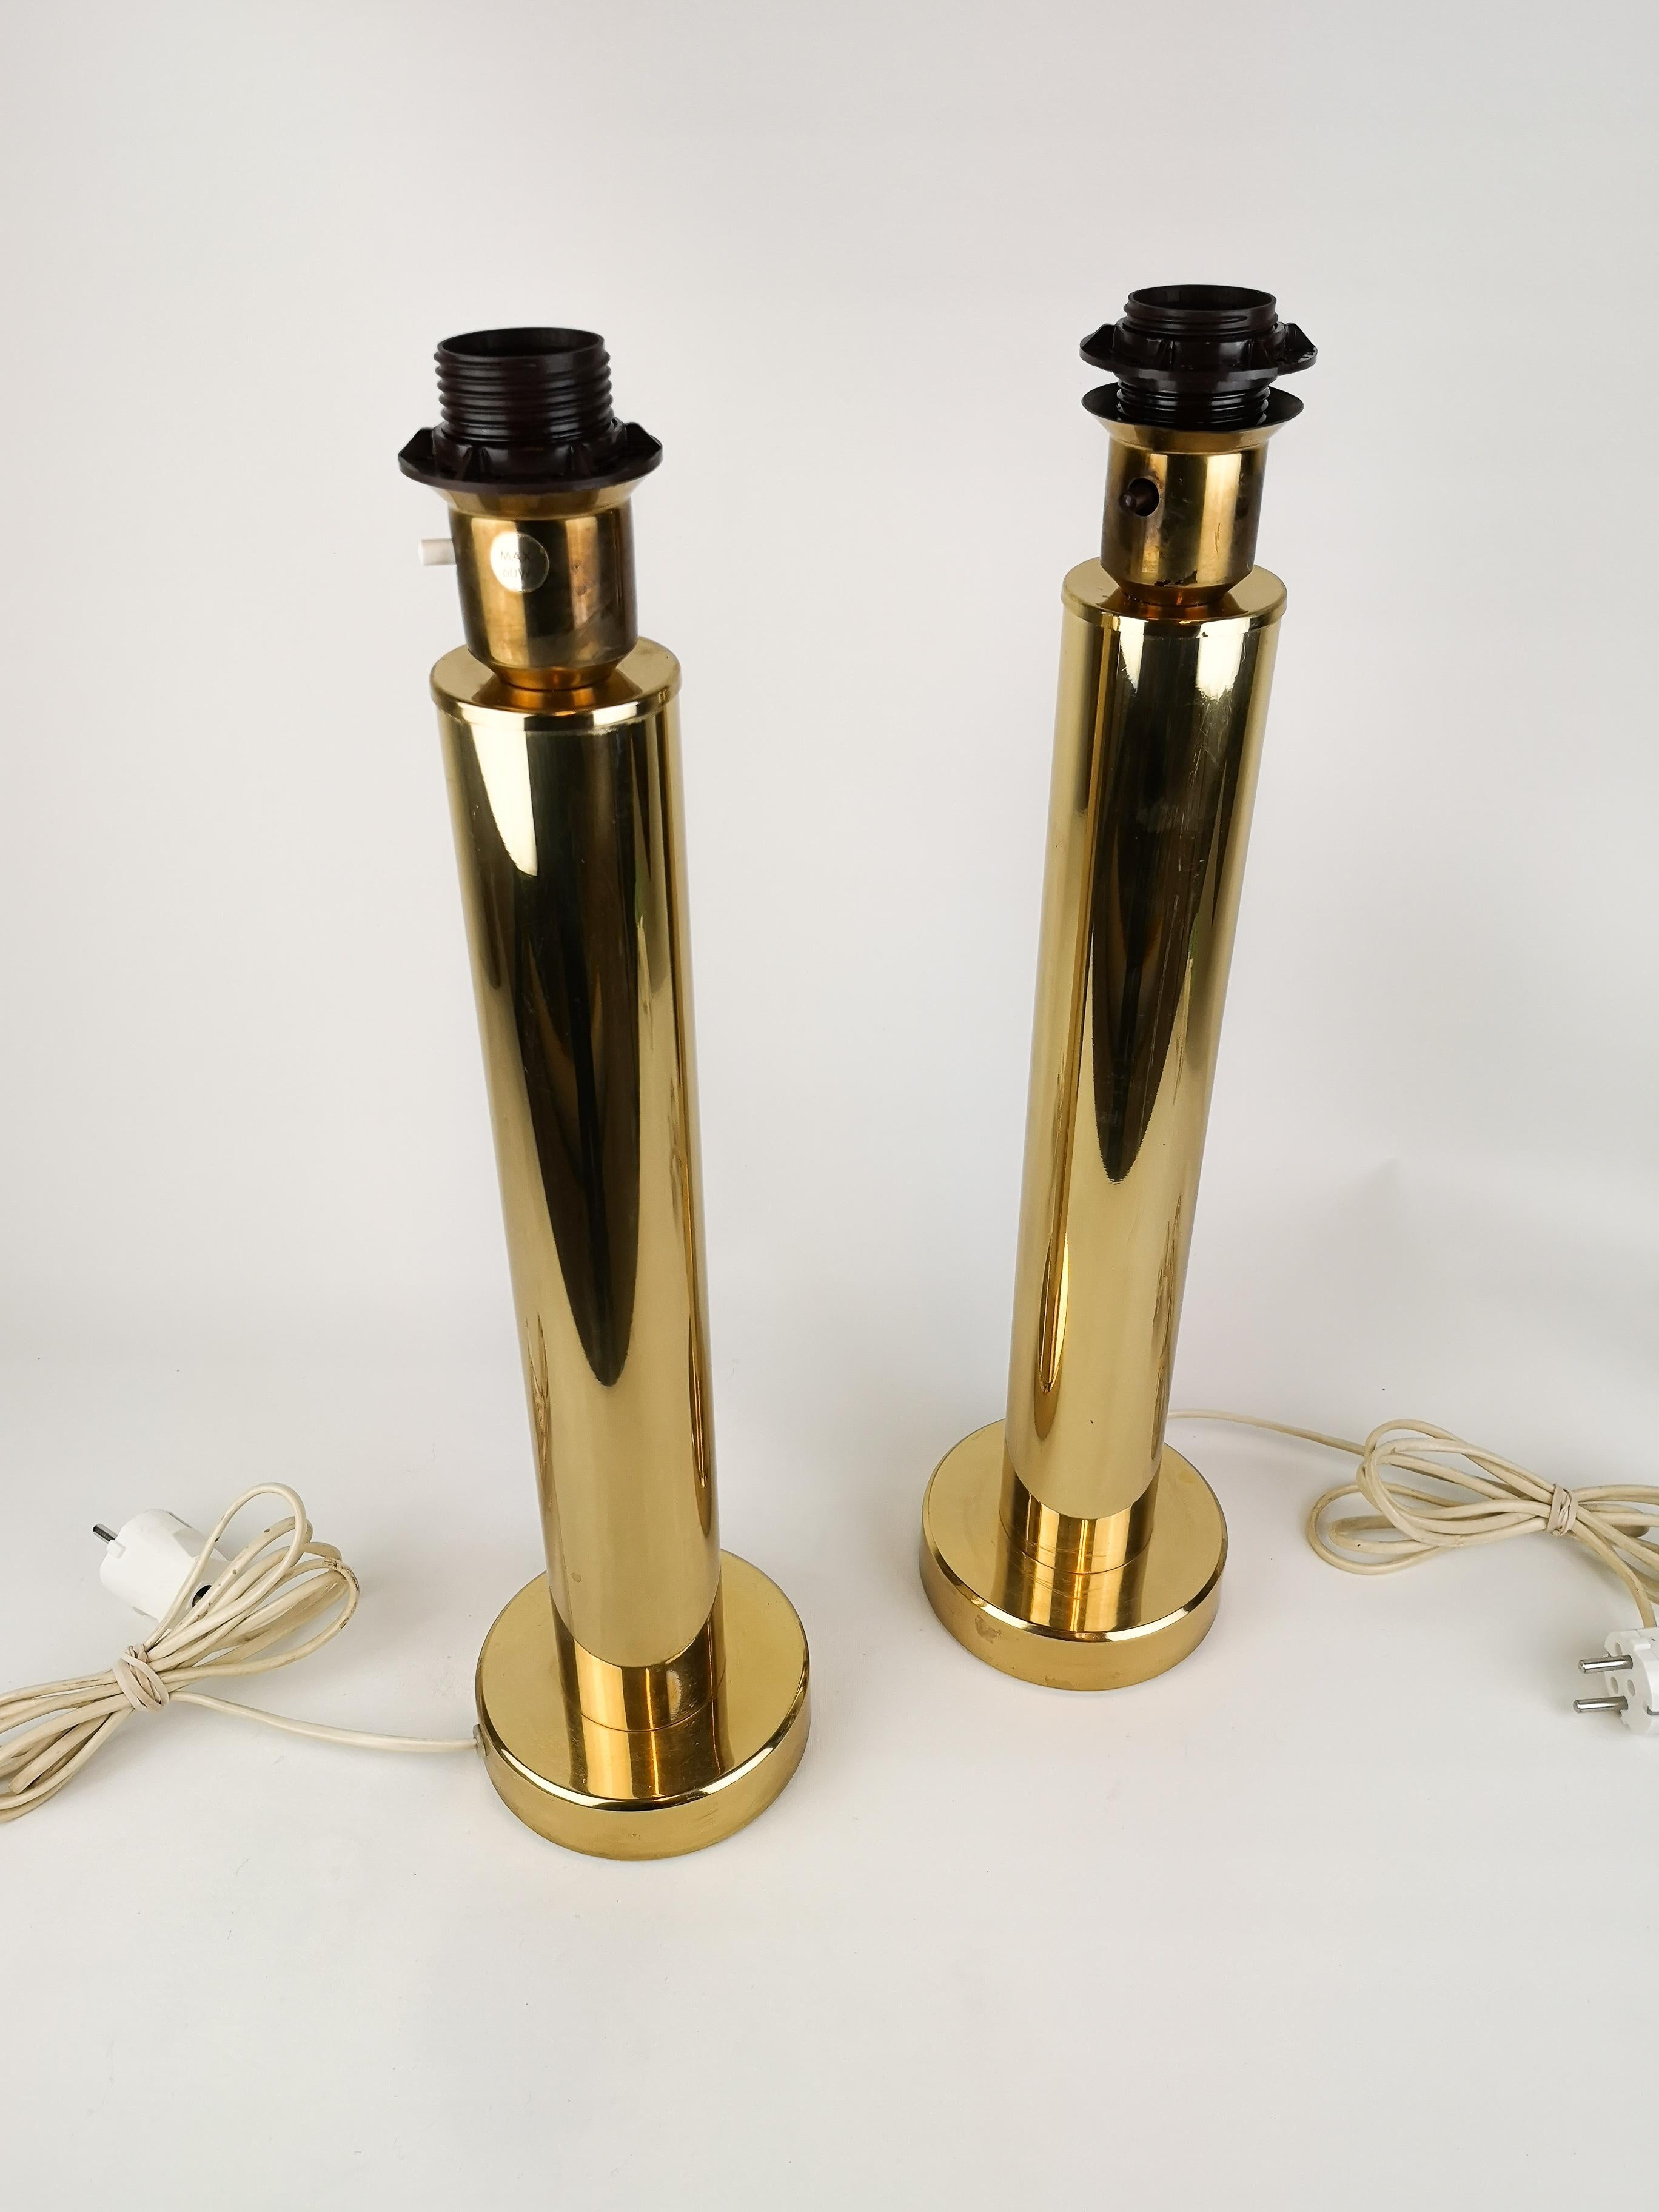 These pair of brass lamps are made in Sweden in the 1960s by Kosta Elarmatur. 

They are in good condition, minor wear of age. 

Measures: H 49 cm, D 13 cm.
 